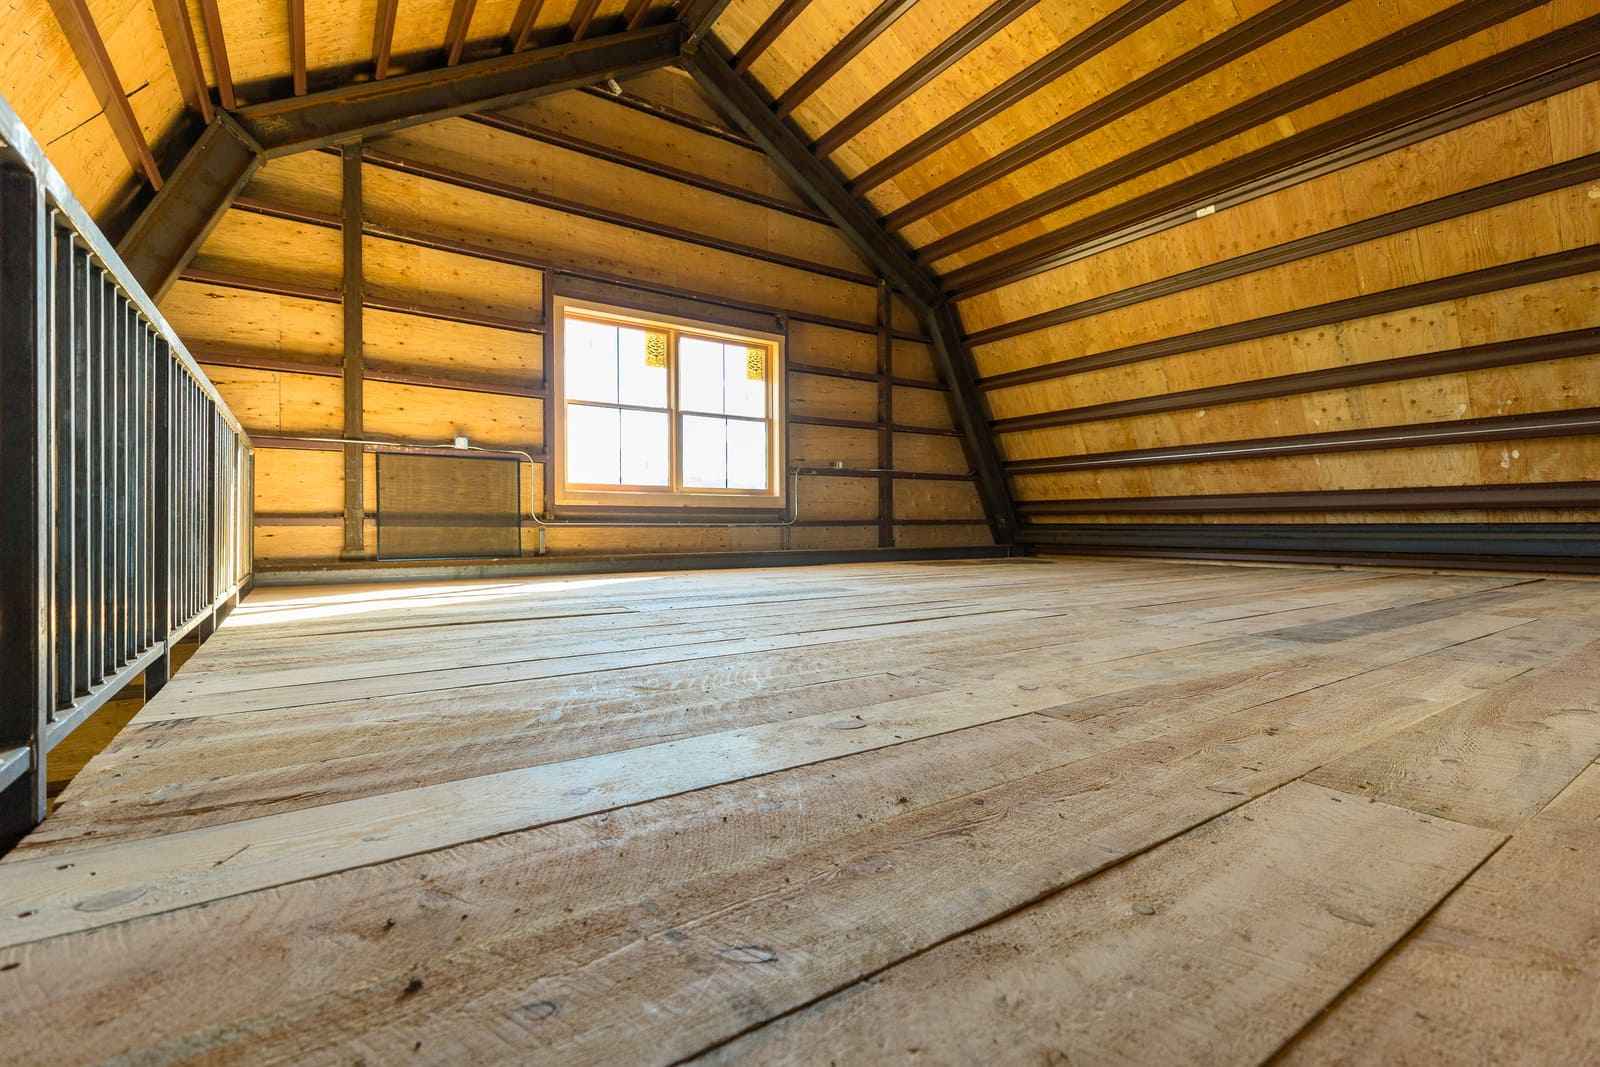 Upper level of barn interior with window and railing